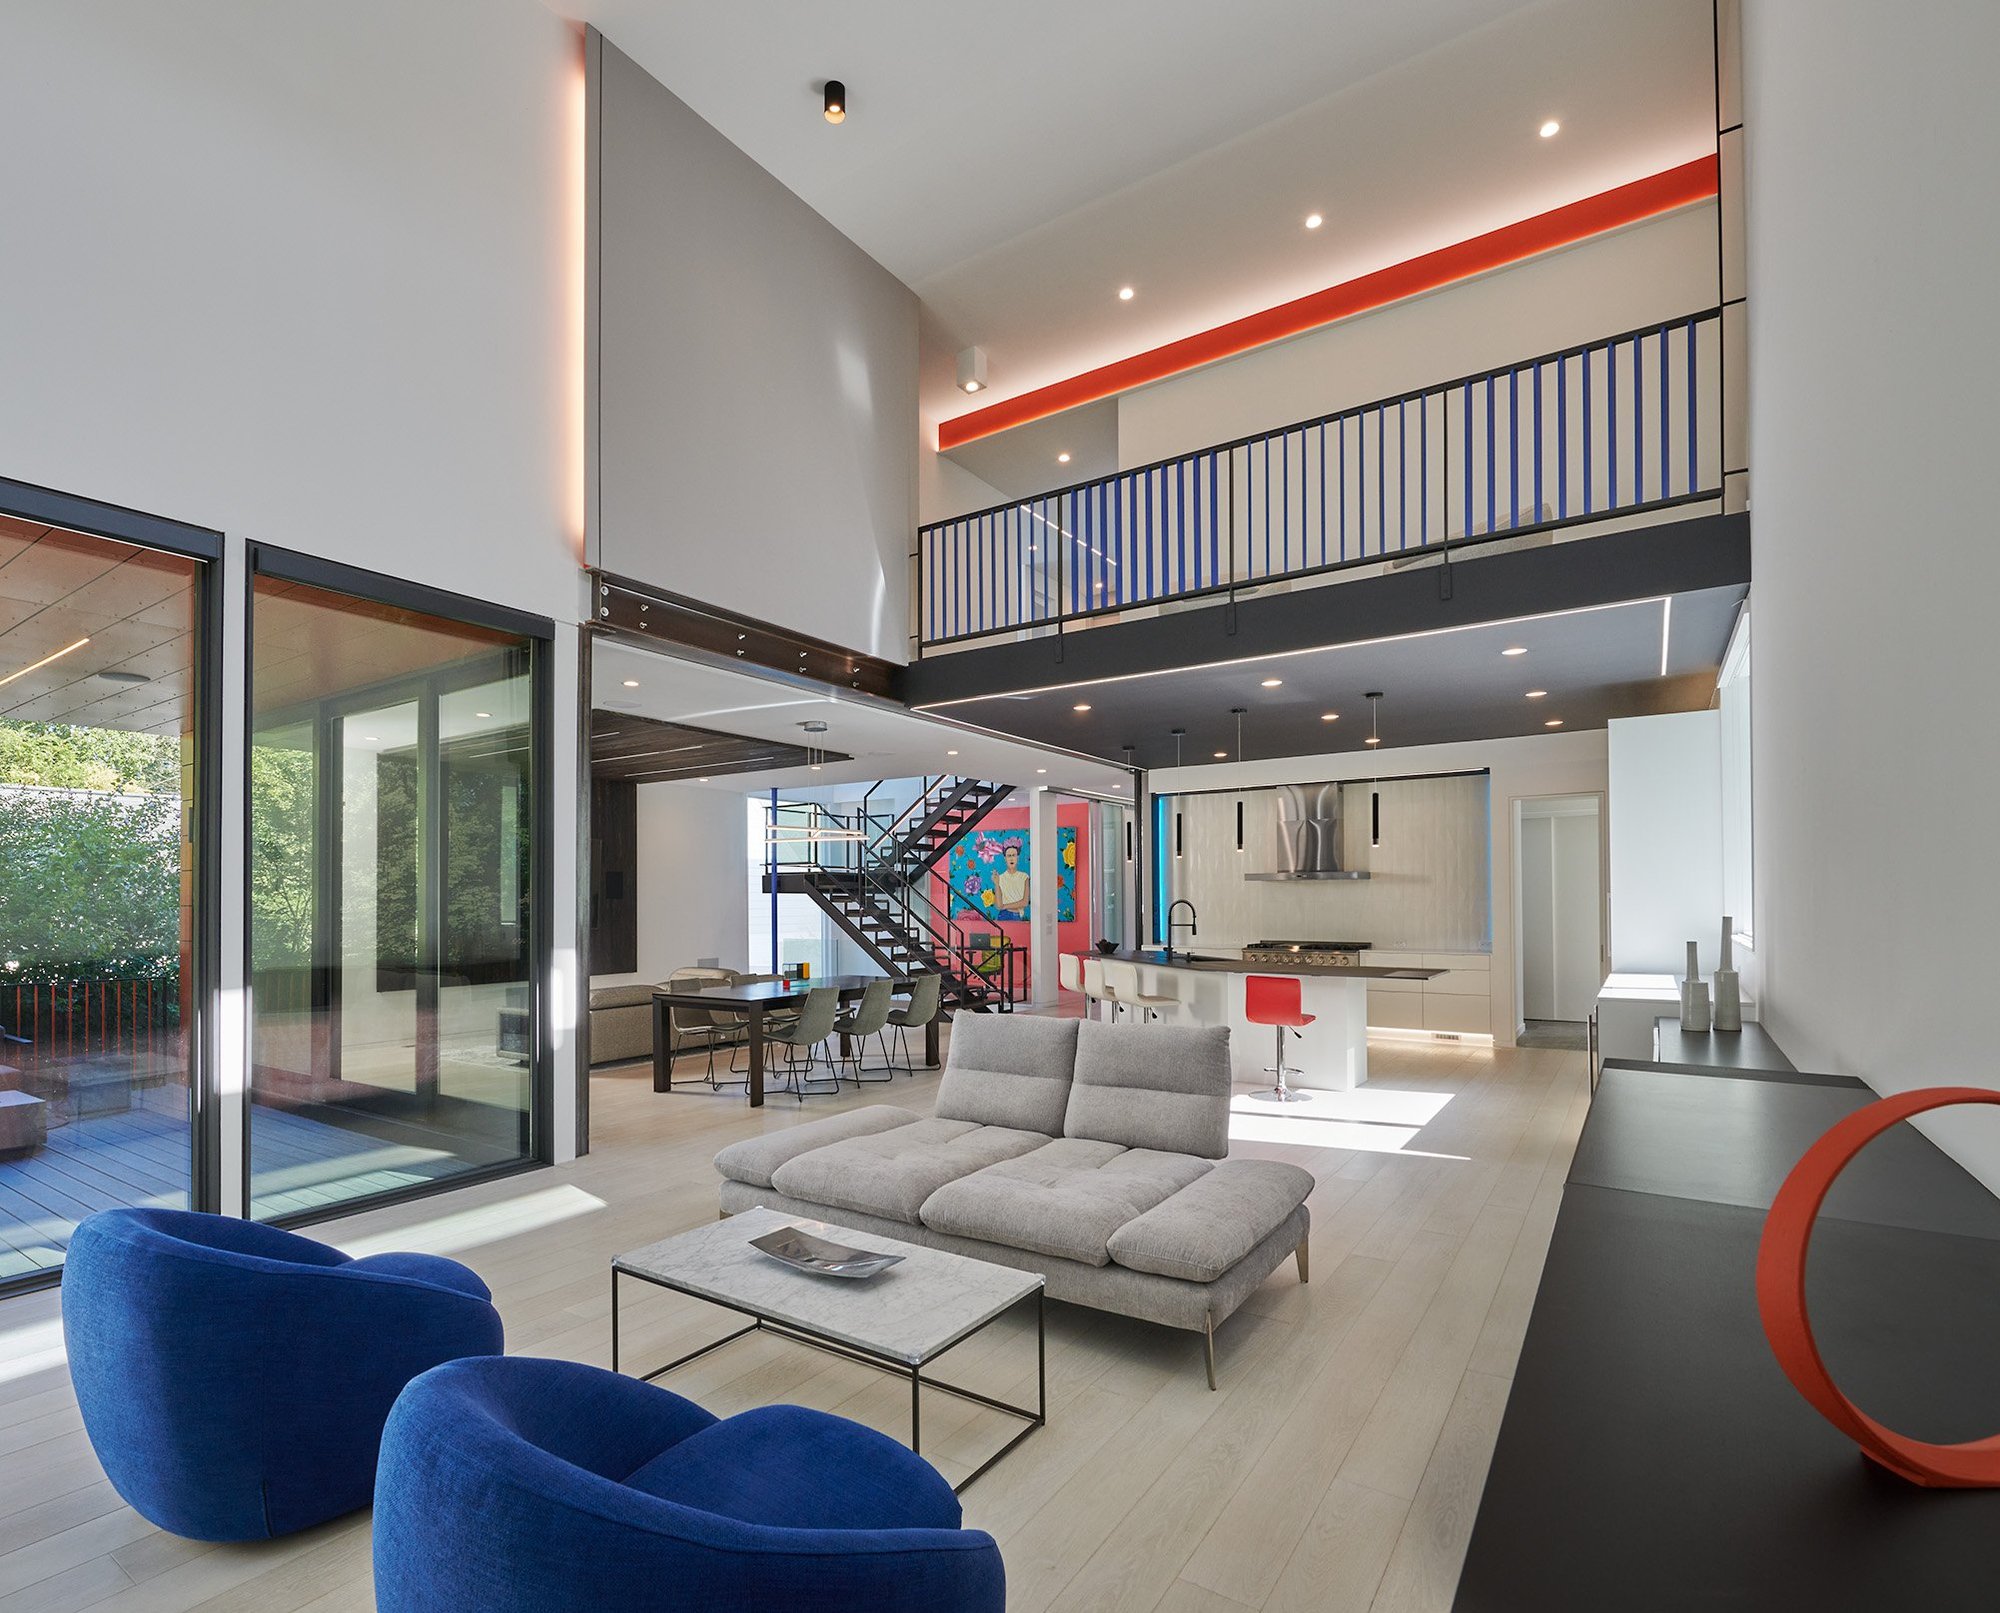 Living room of modern home with a kitchen and staircase in the background.  An open balcony over looks the room.